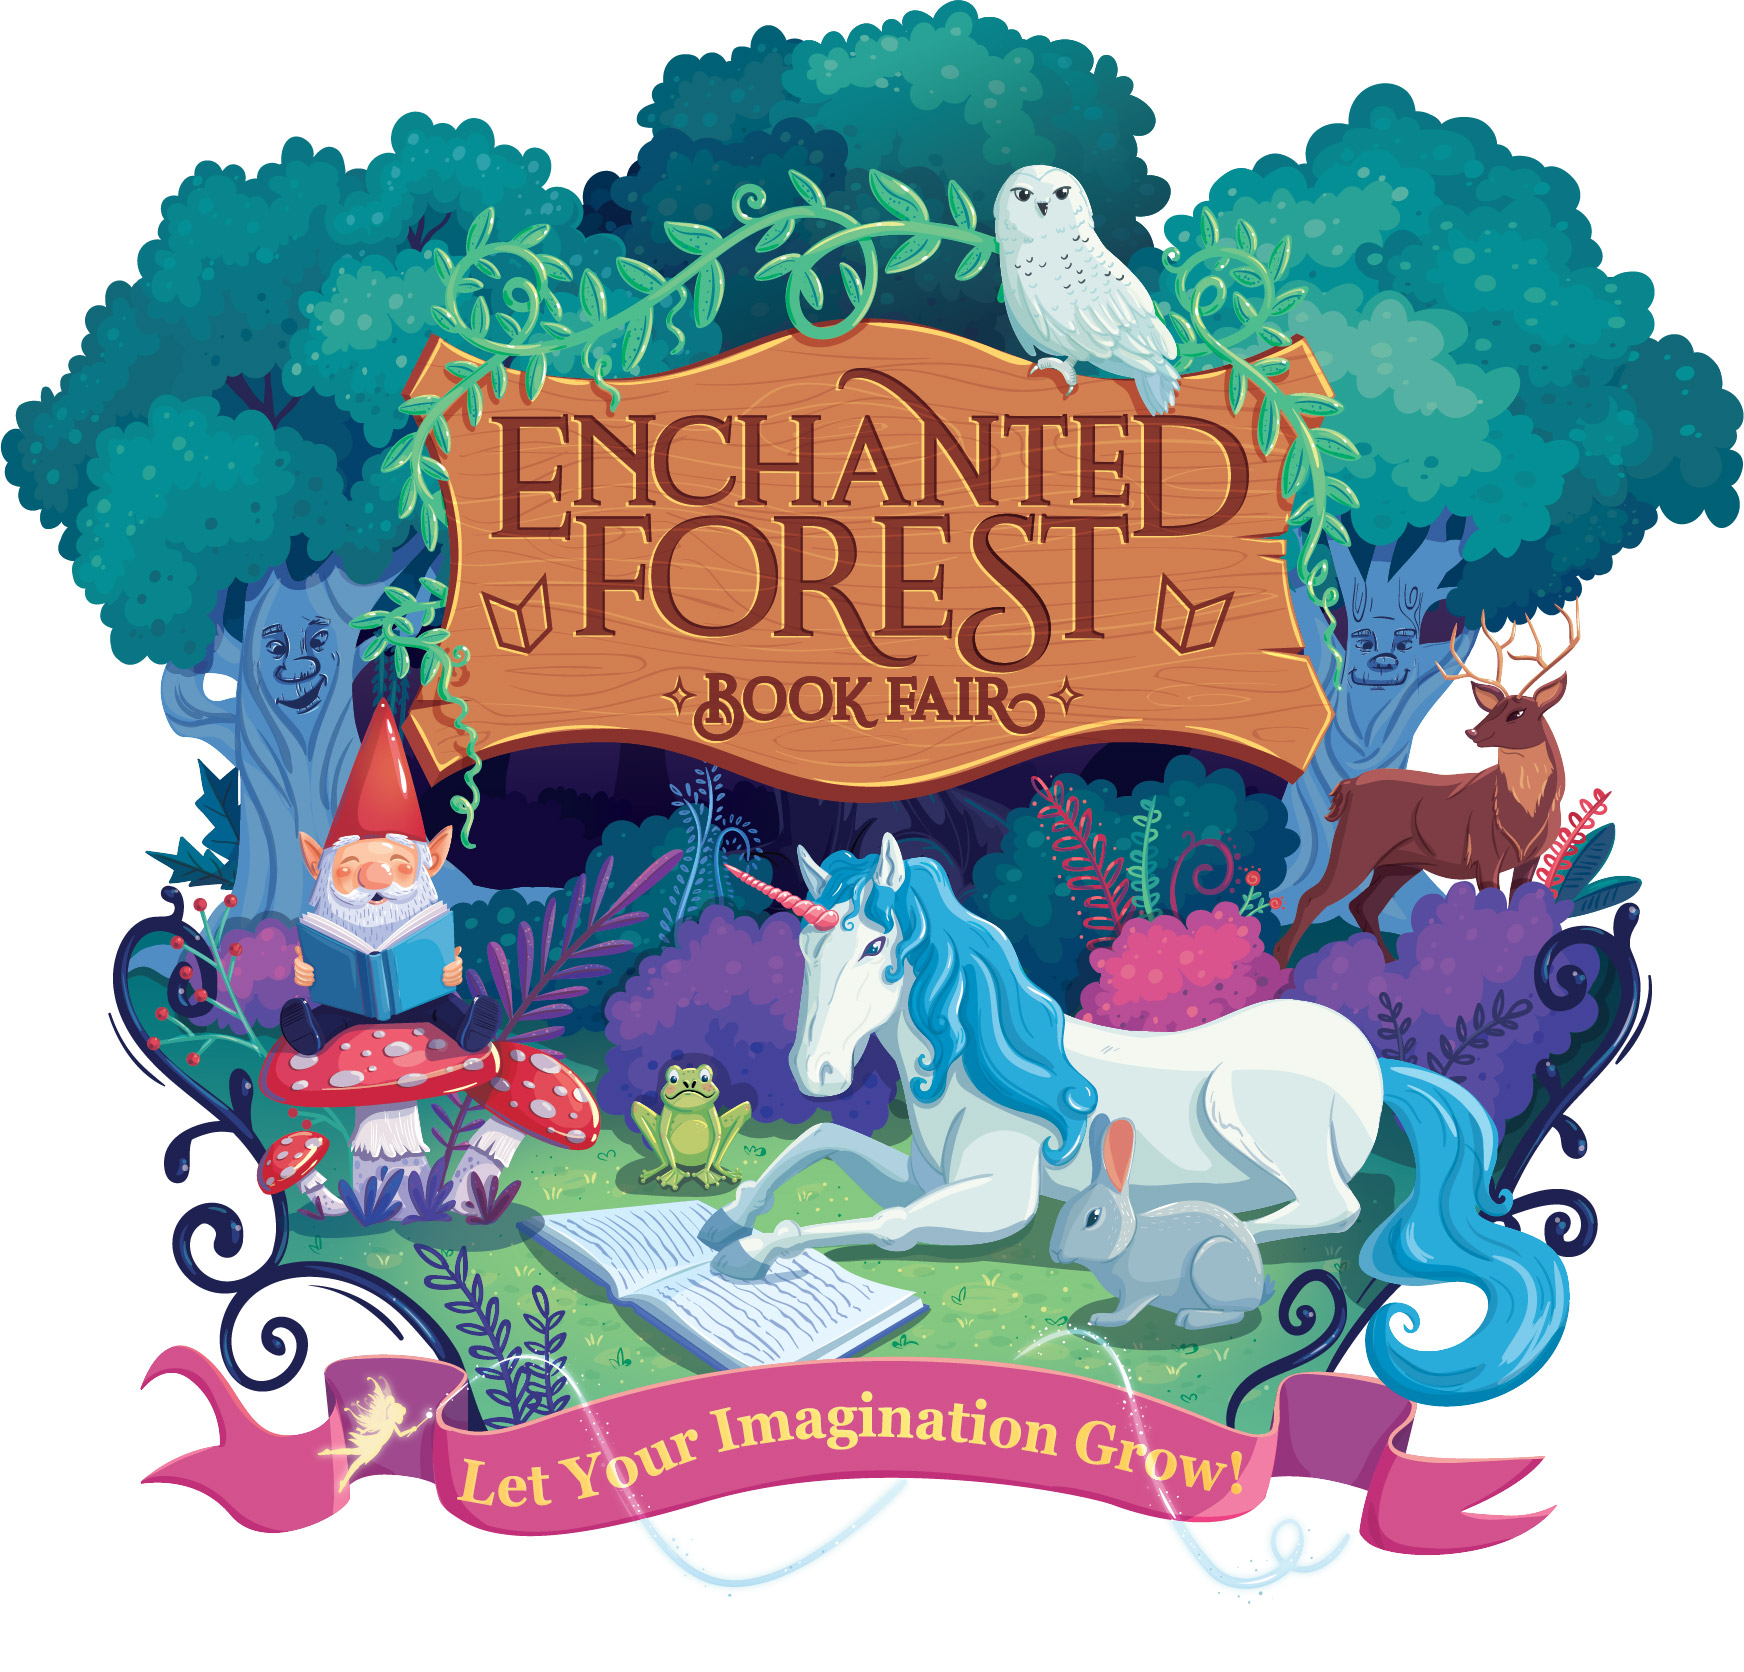 forest clipart fairytale forest